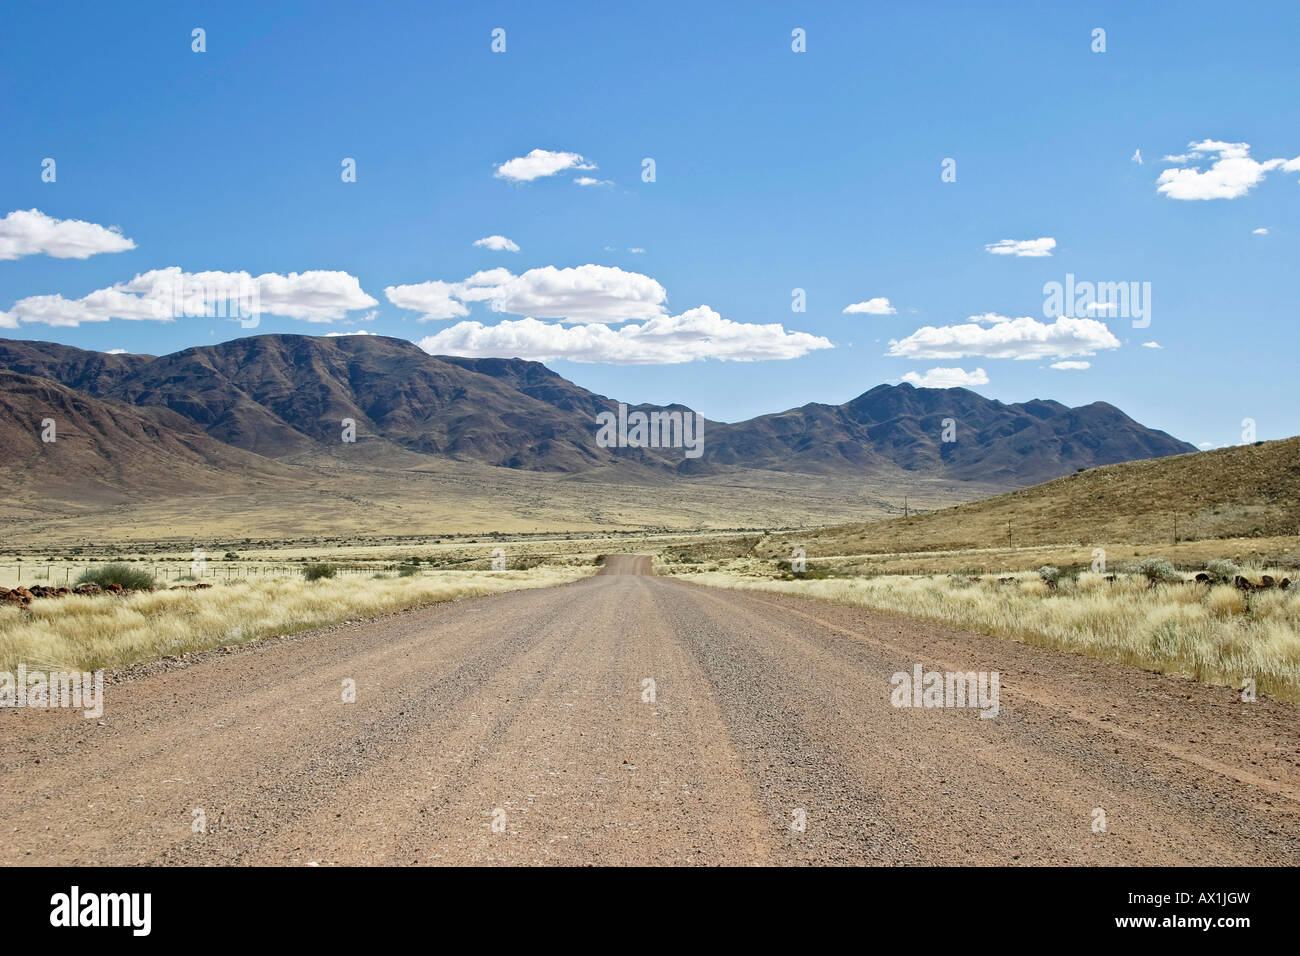 Gravelroad in the south of Namibia, Africa Stock Photo